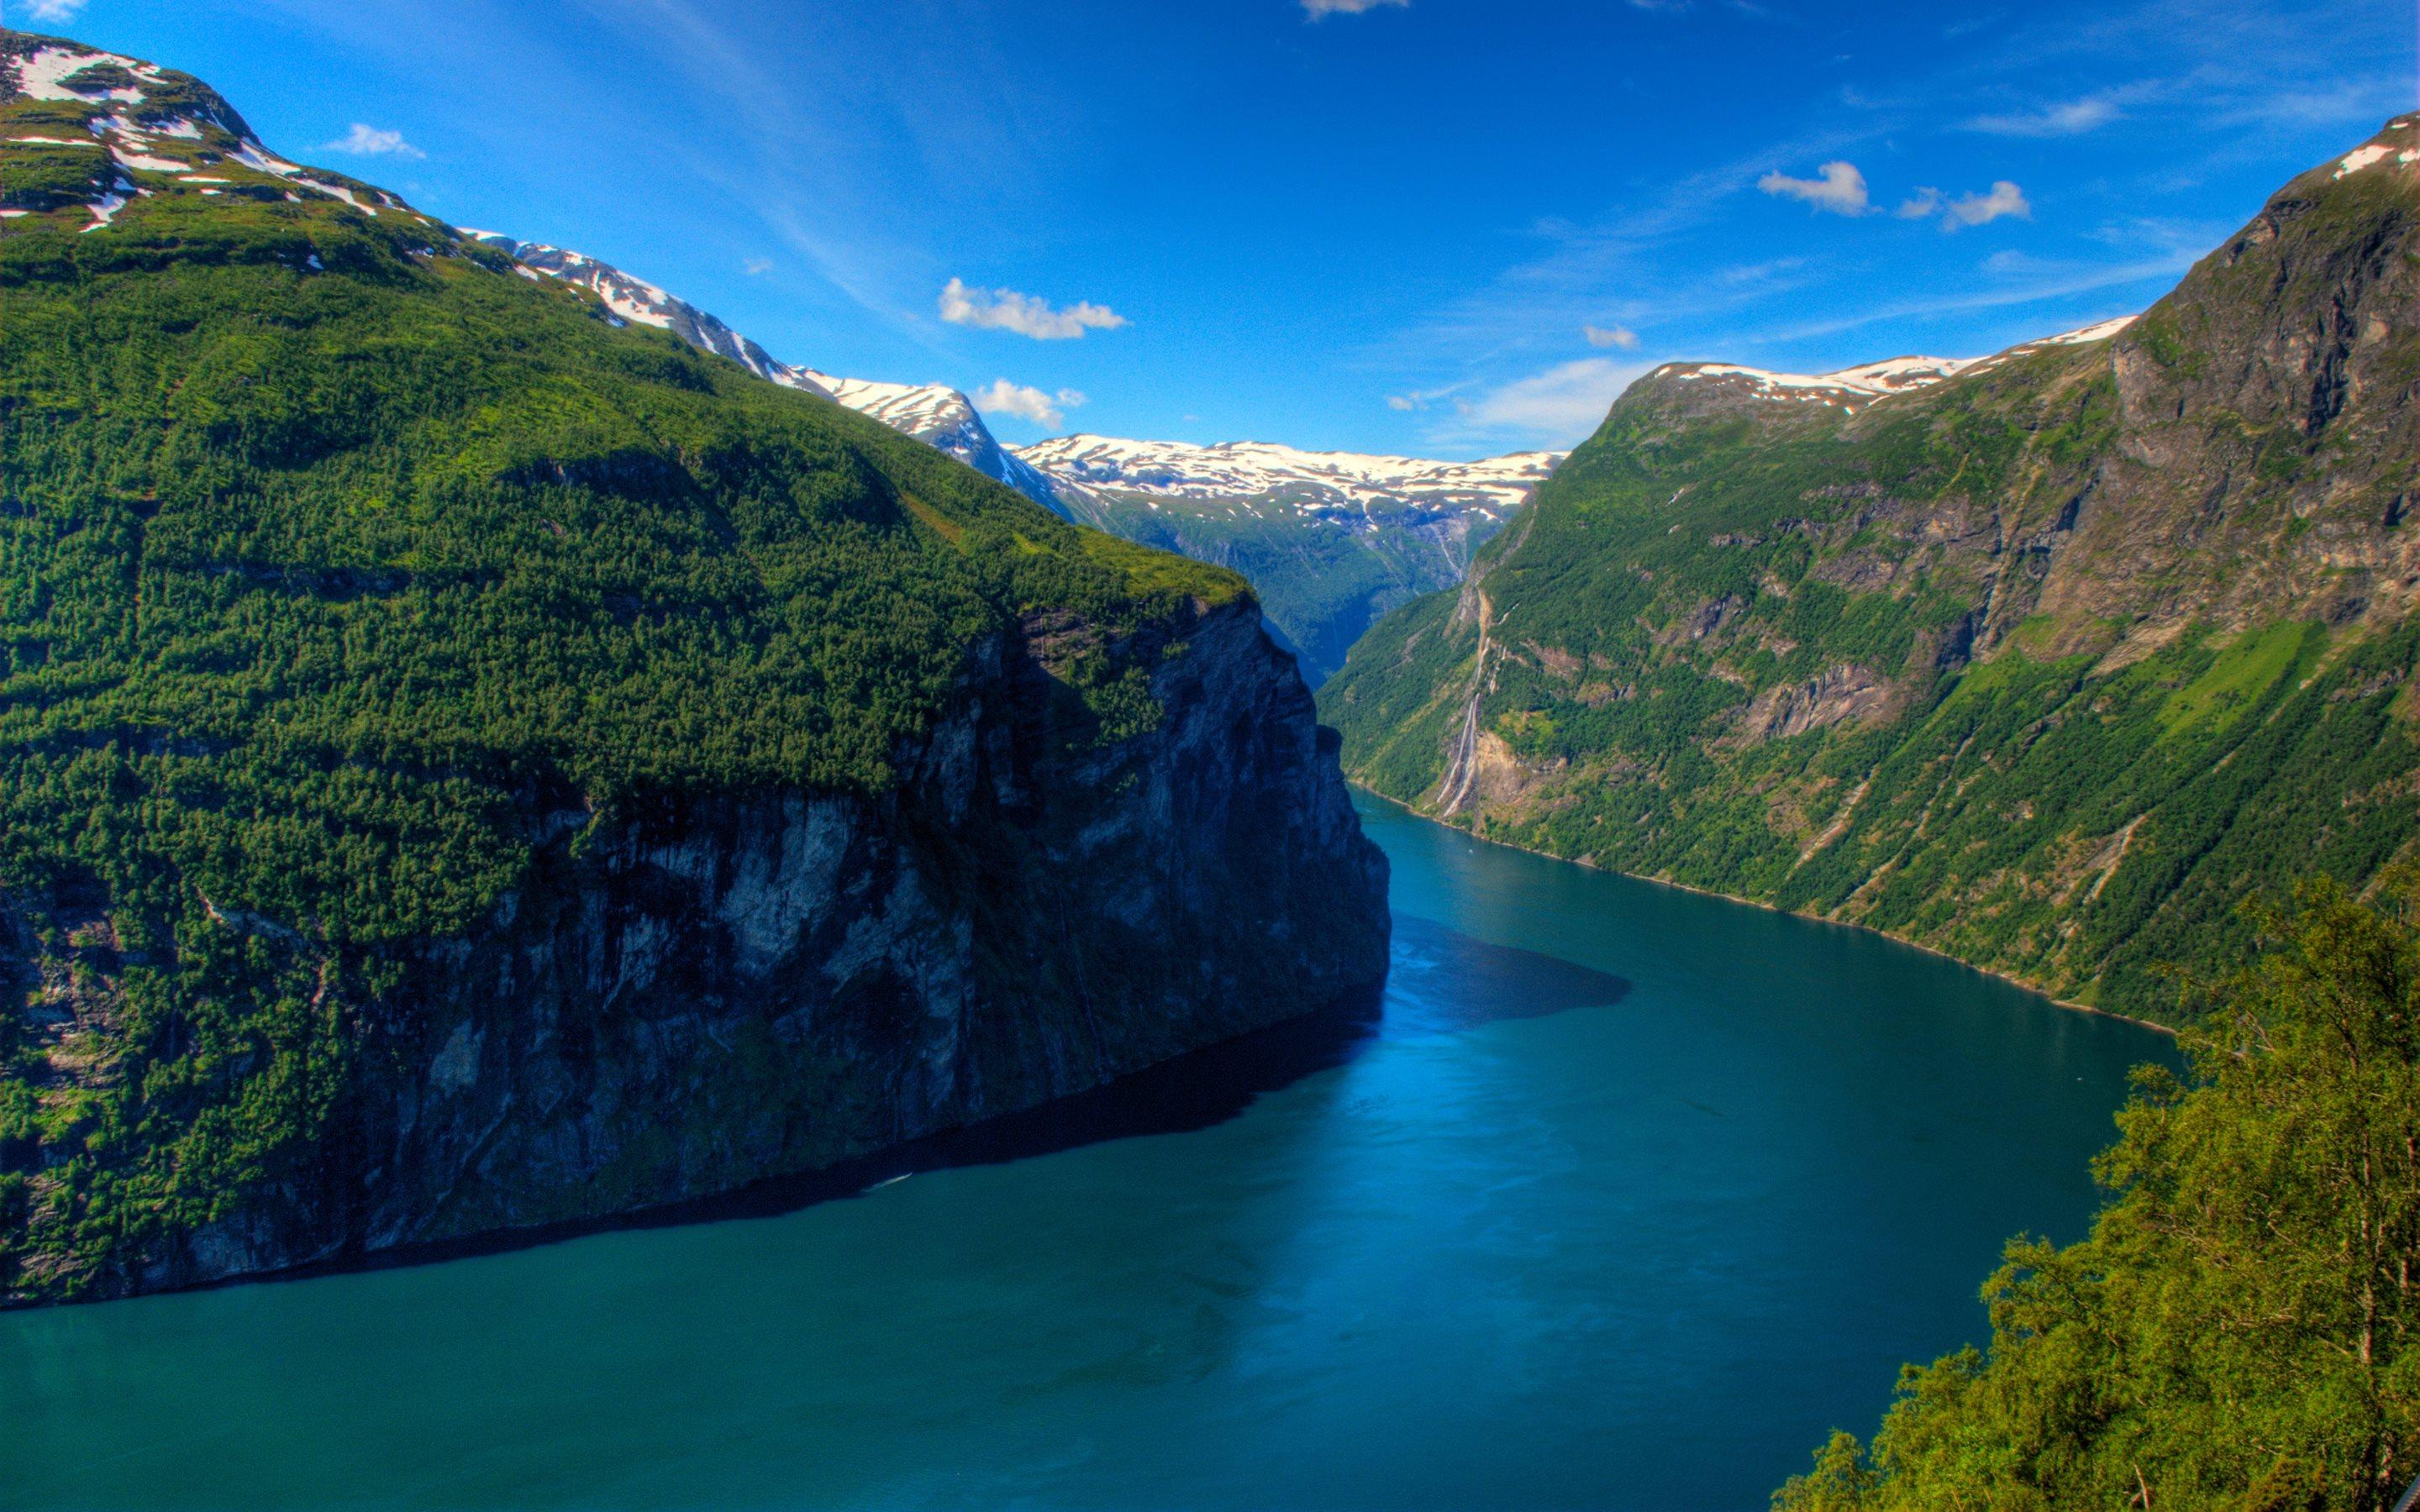 Download wallpaper Geirangerfjord fjord, summer, mountains, sea, fjords, Norway for desktop with resolution 2880x1800. High Quality HD picture wallpaper